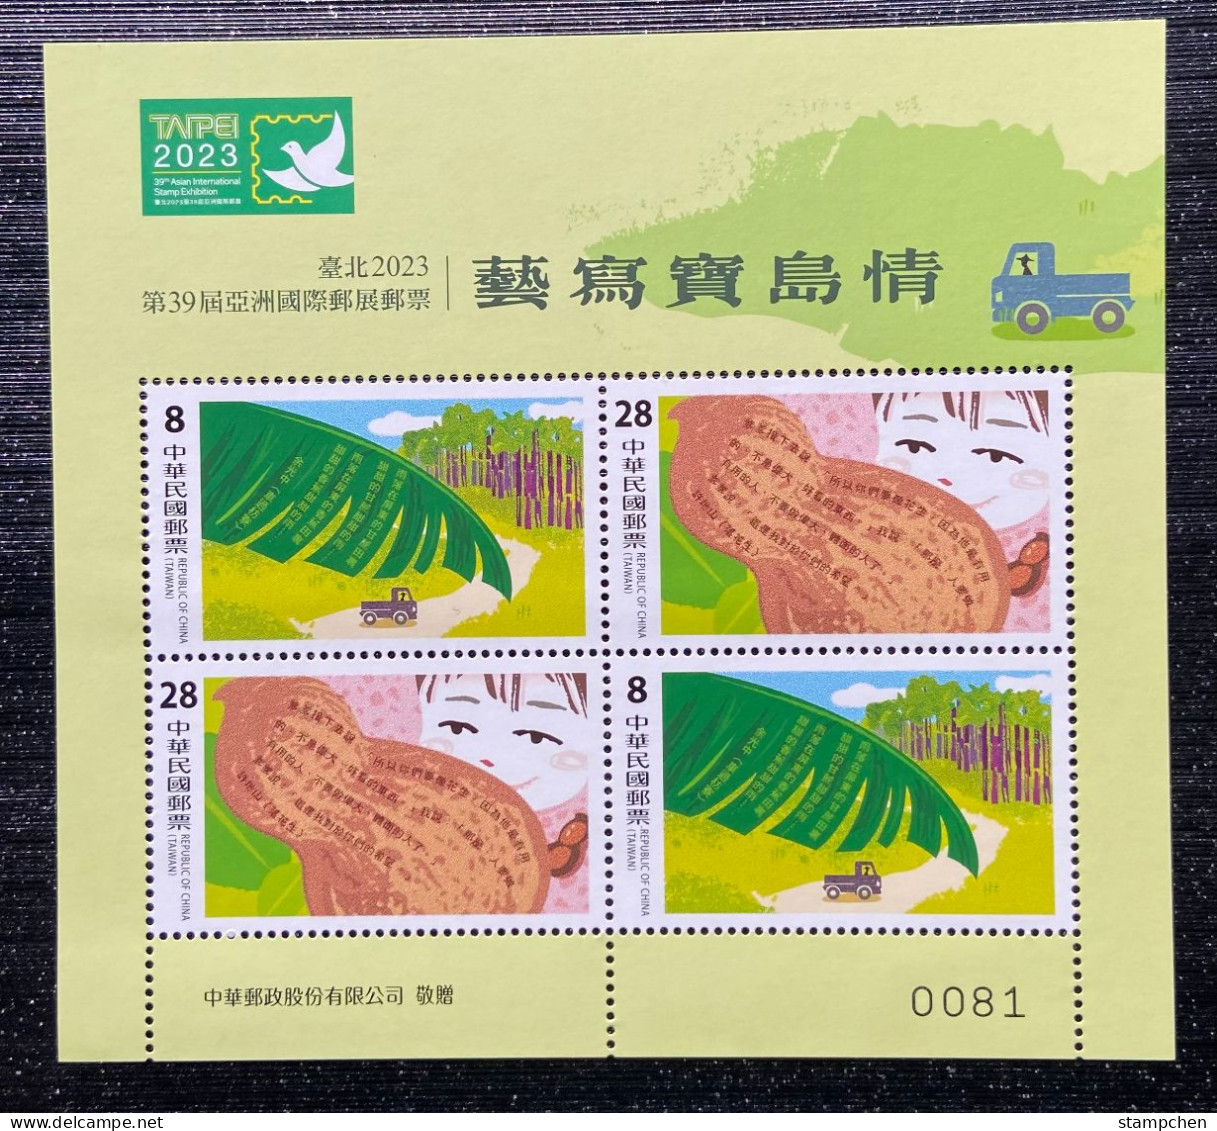 Taiwan Special Sheetlet 2023 Taipei Stamp Exhi.- Literature Stamps Banana Sugarcane Peanut Truck - Unused Stamps